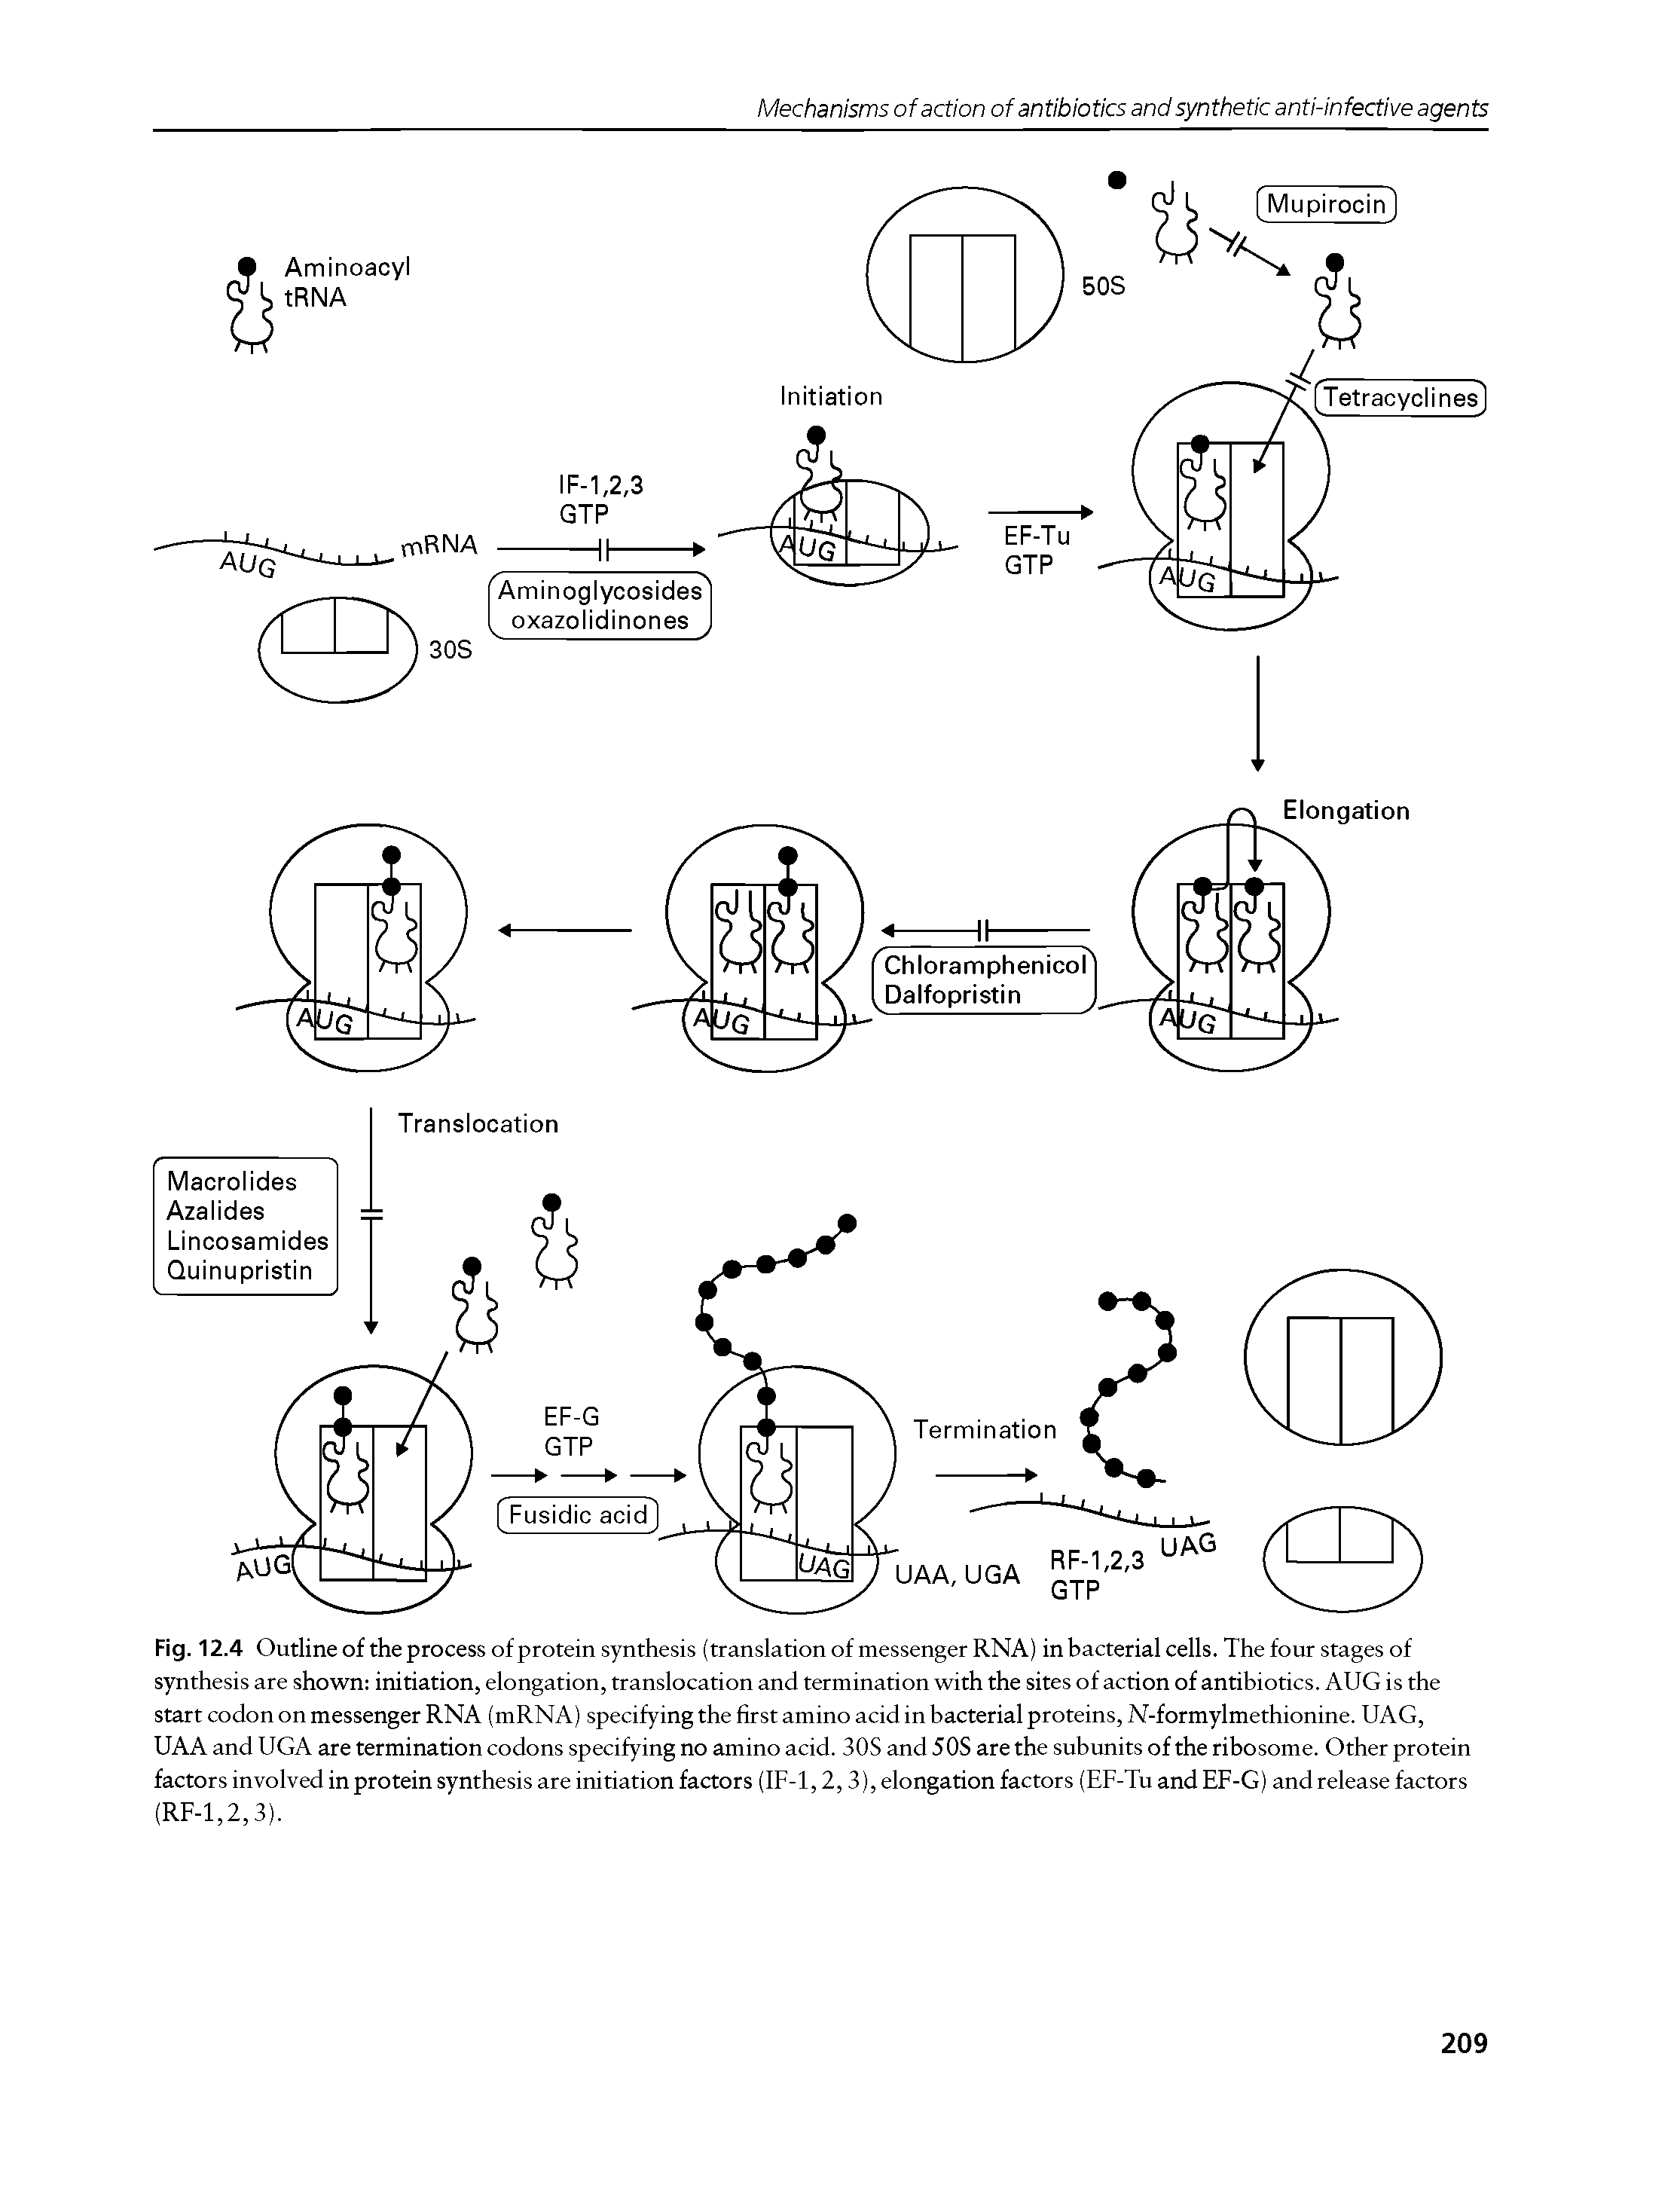 Fig. 12.4 Outline of the process of protein synthesis (translation of messenger RNA) in bacterial cells. The four stages of synthesis are shown initiation, elongation, translocation and termination with the sites of action of antibiotics. AUG is the start codon on messenger RNA (mRNA) specifying the first amino acid in bacterial proteins, N-formylmethionine. UAG, UAA and UGA are termination codons specifying no amino acid. 30S and 50S are the subunits of the ribosome. Other protein factors involved in protein synthesis are initiation factors (IF-1,2,3), elongation factors (EF-Tu and EF-G) and release factors (RF-1,2,3).